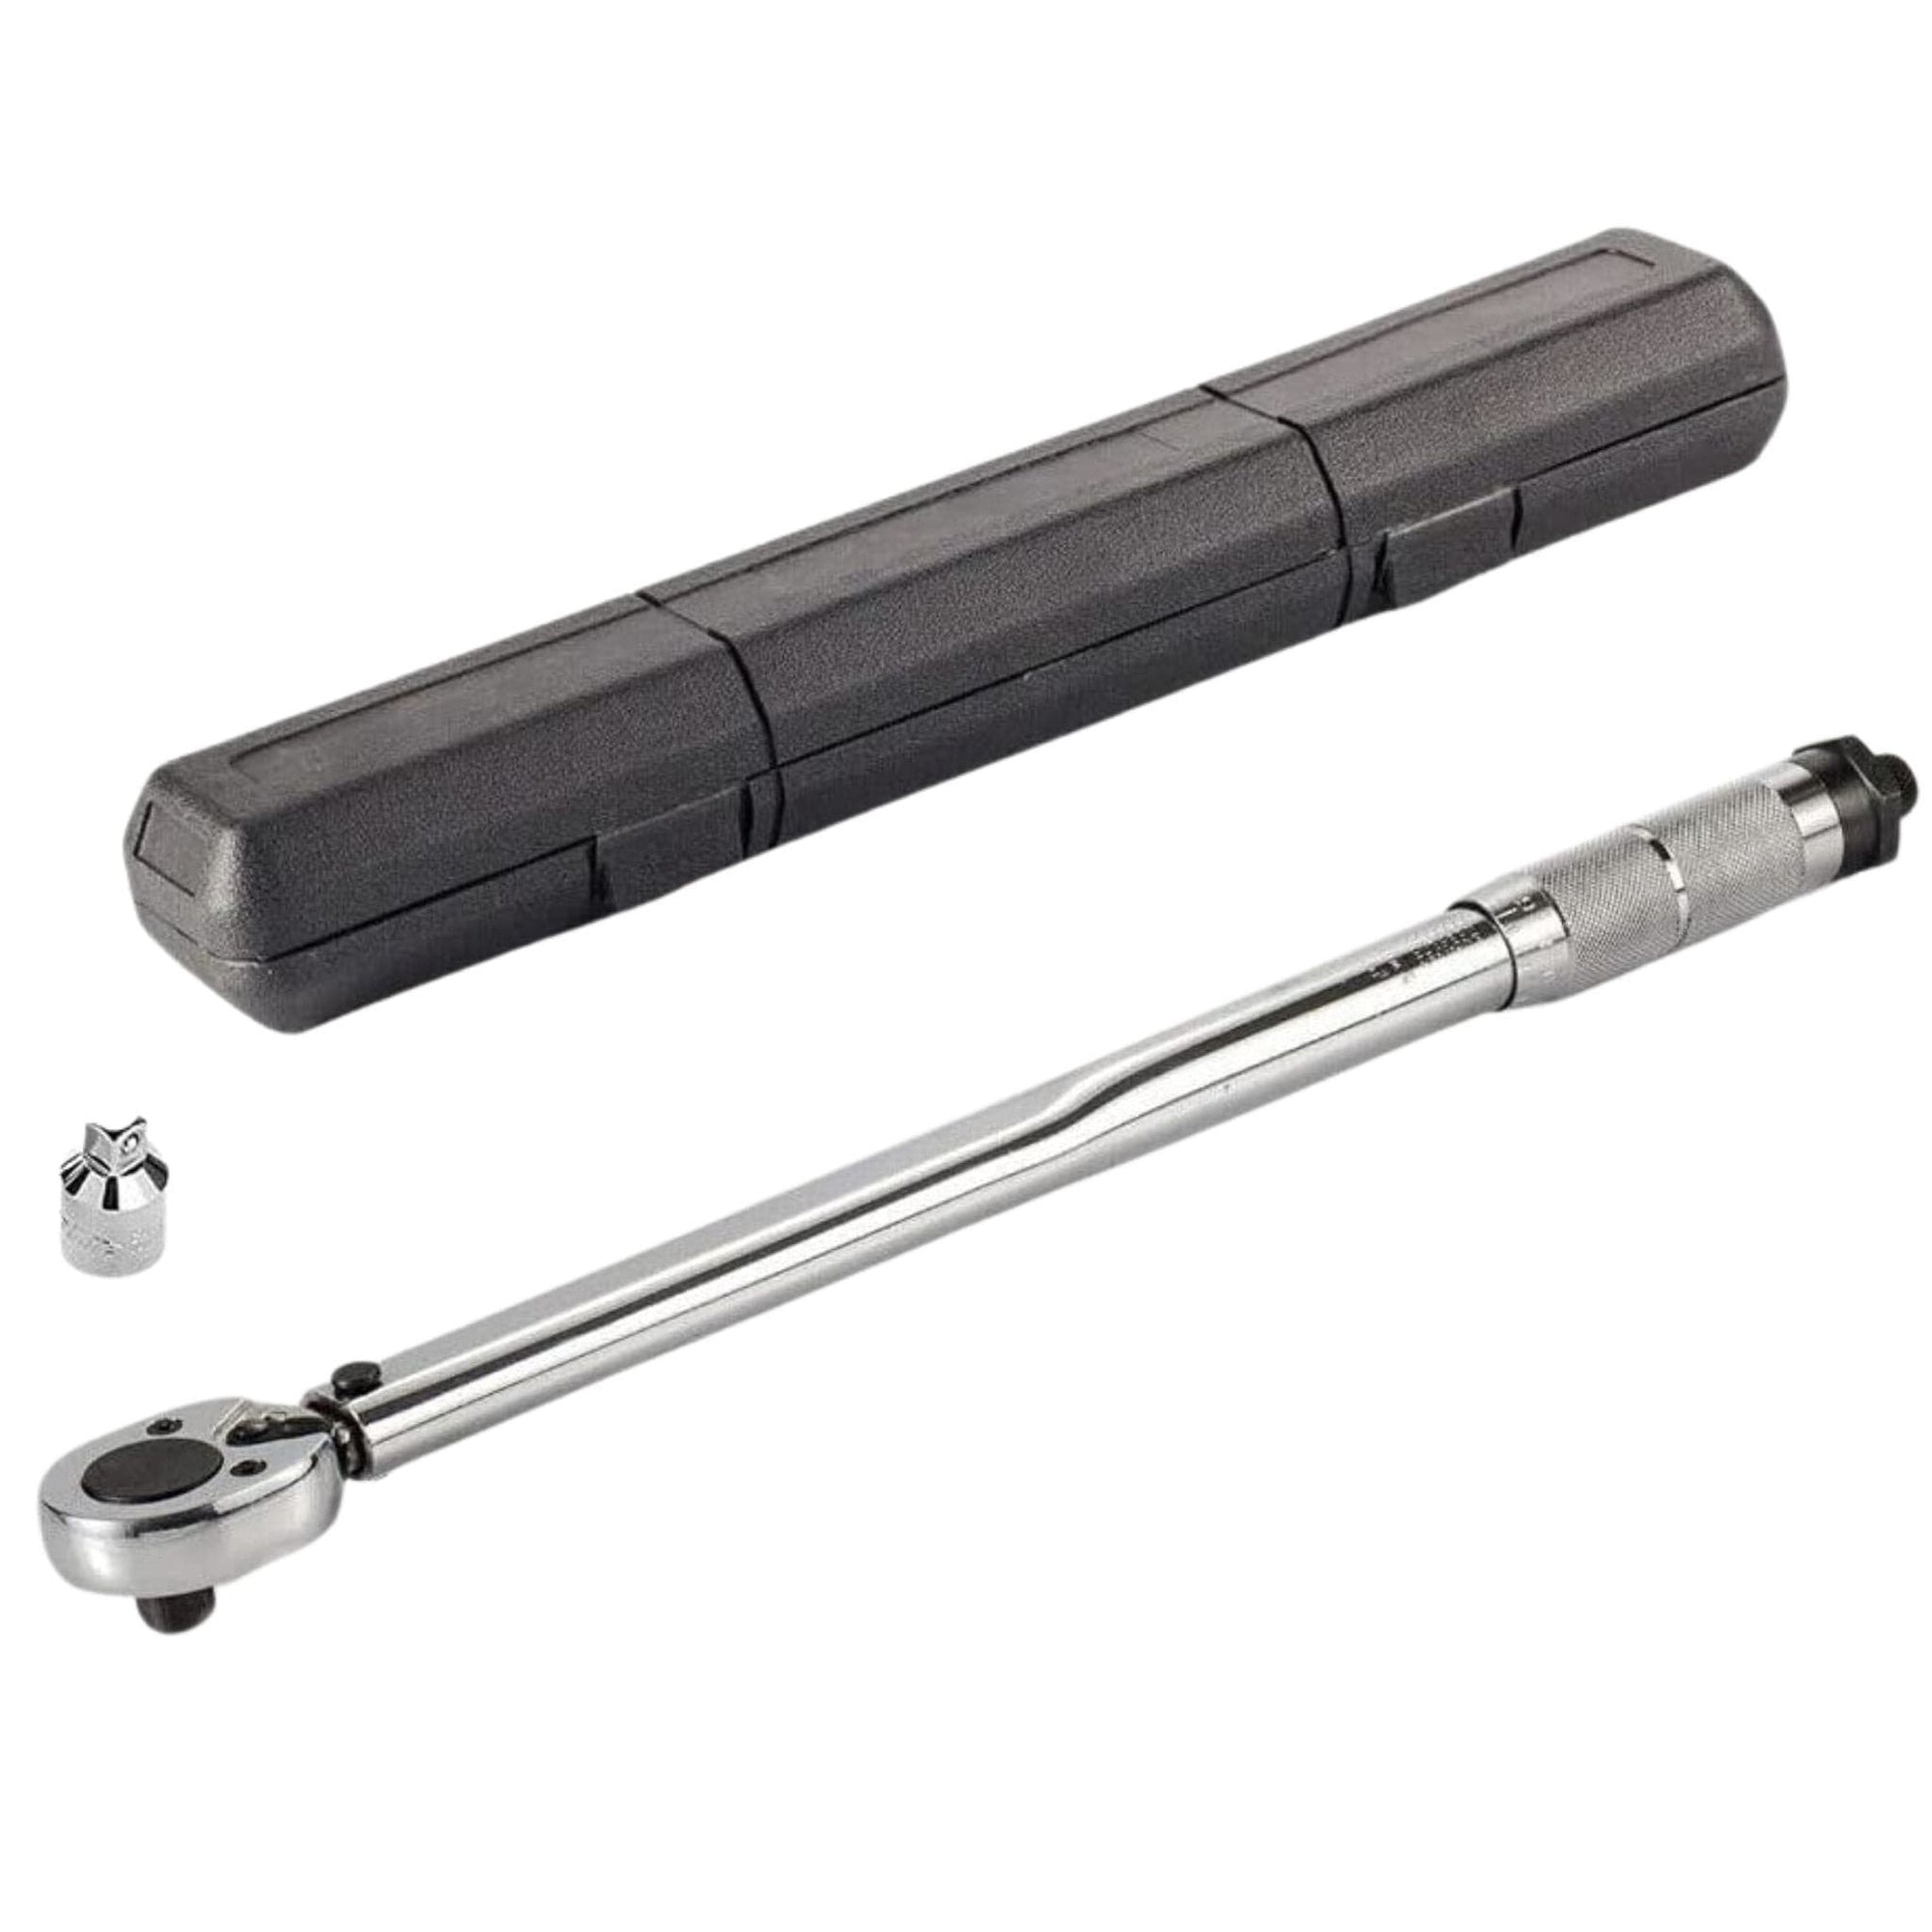 1/2" Drive Torque Wrench - South East Clearance Centre